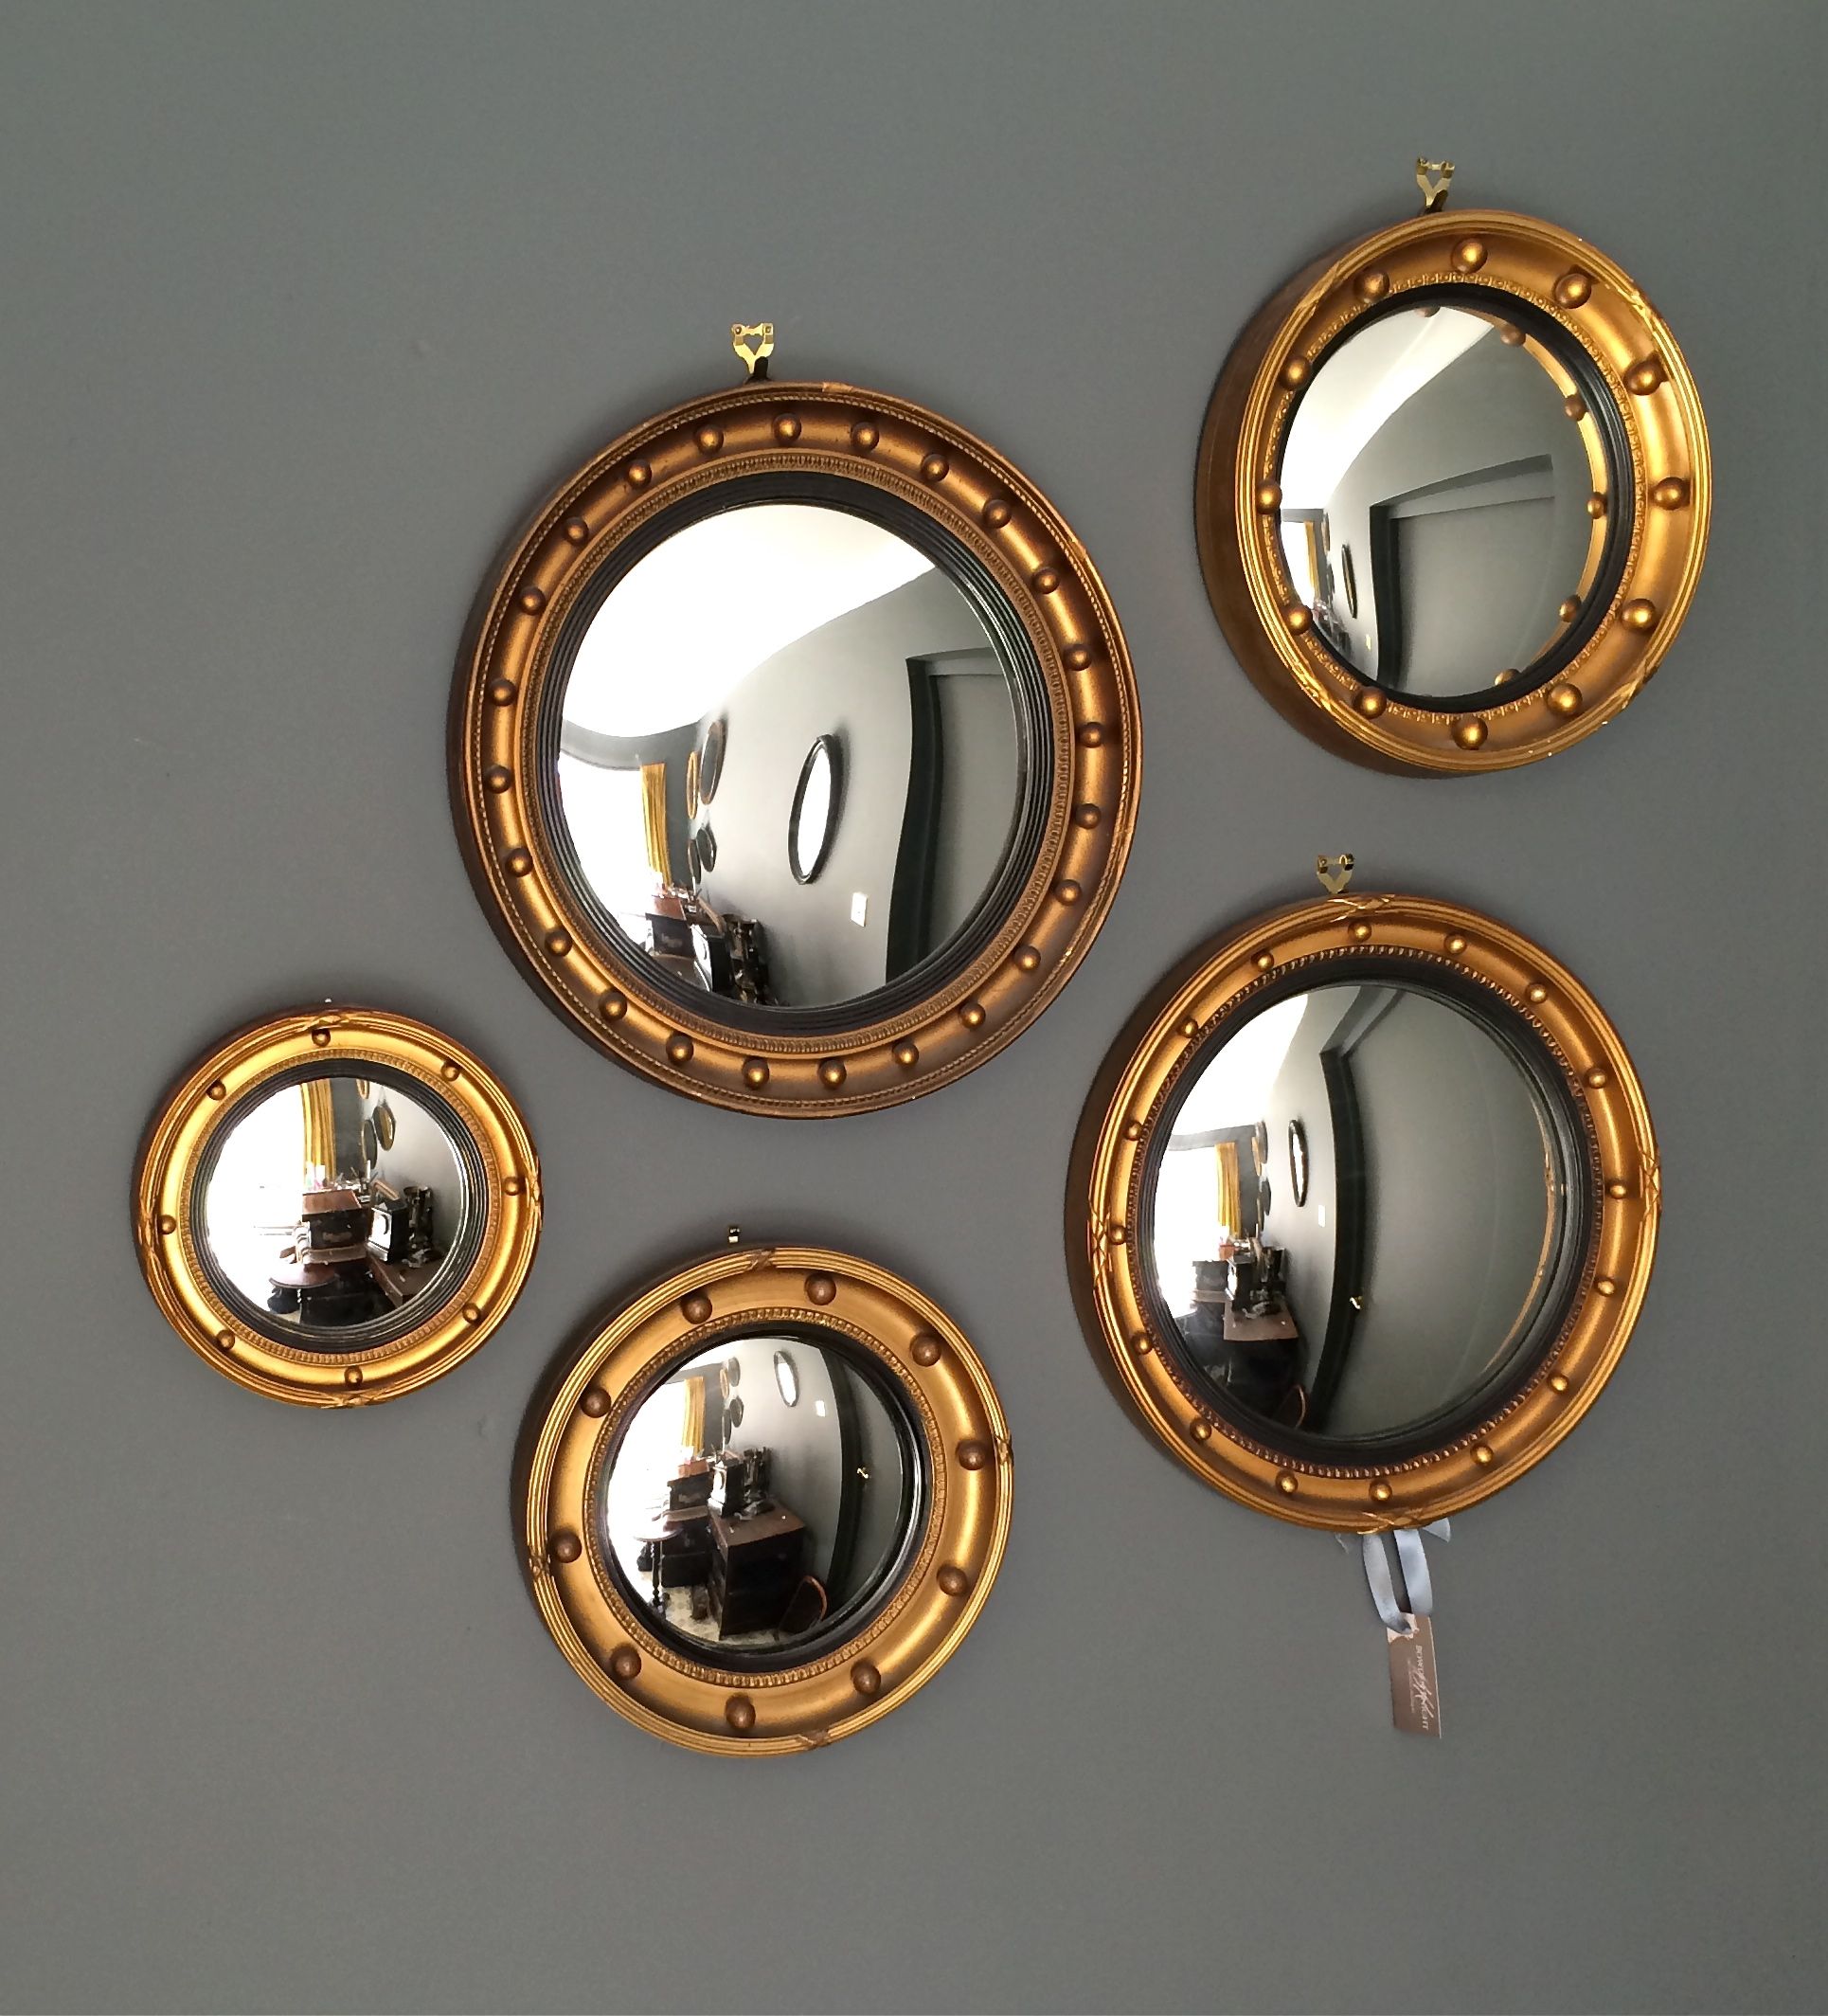 Summer Styling The Decorative Antique Way At Bowden Knight Regarding Decorative Convex Mirror (View 6 of 15)